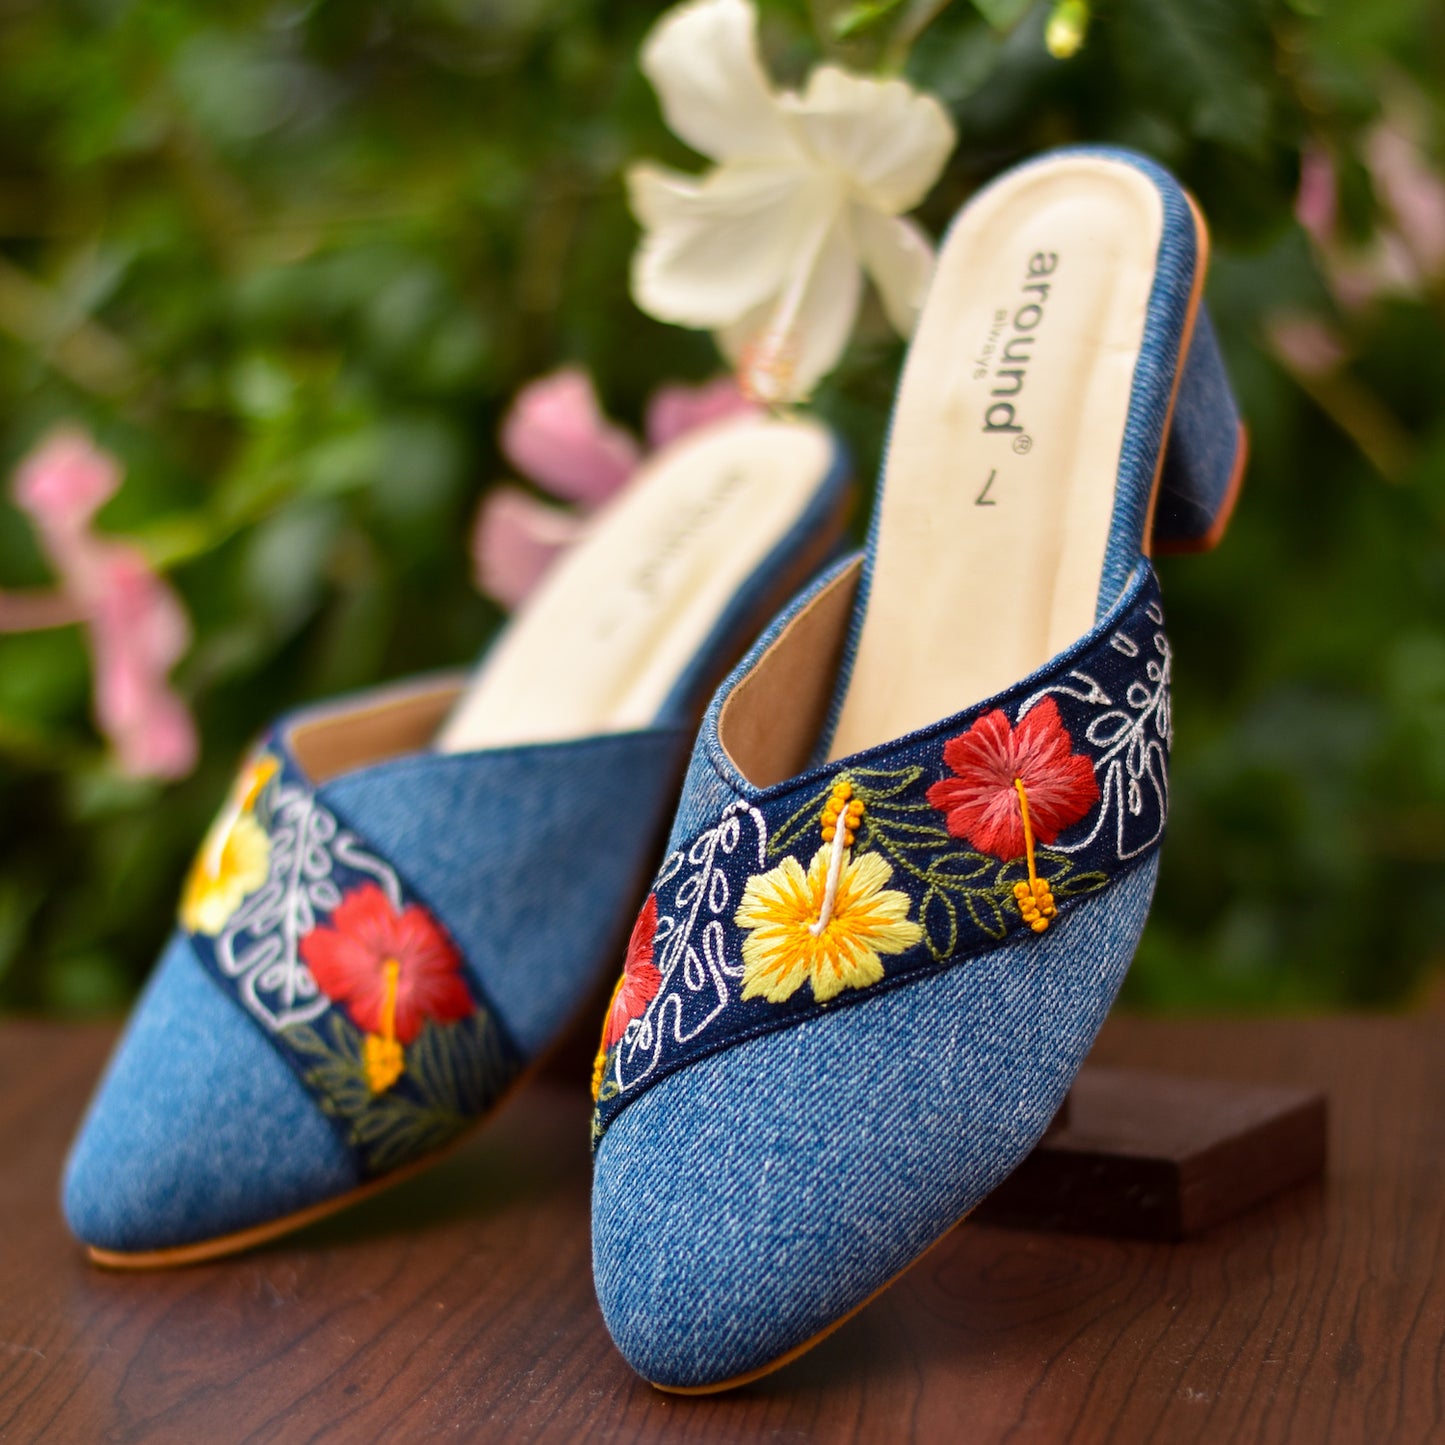 Floral denim mules for women's casual wear